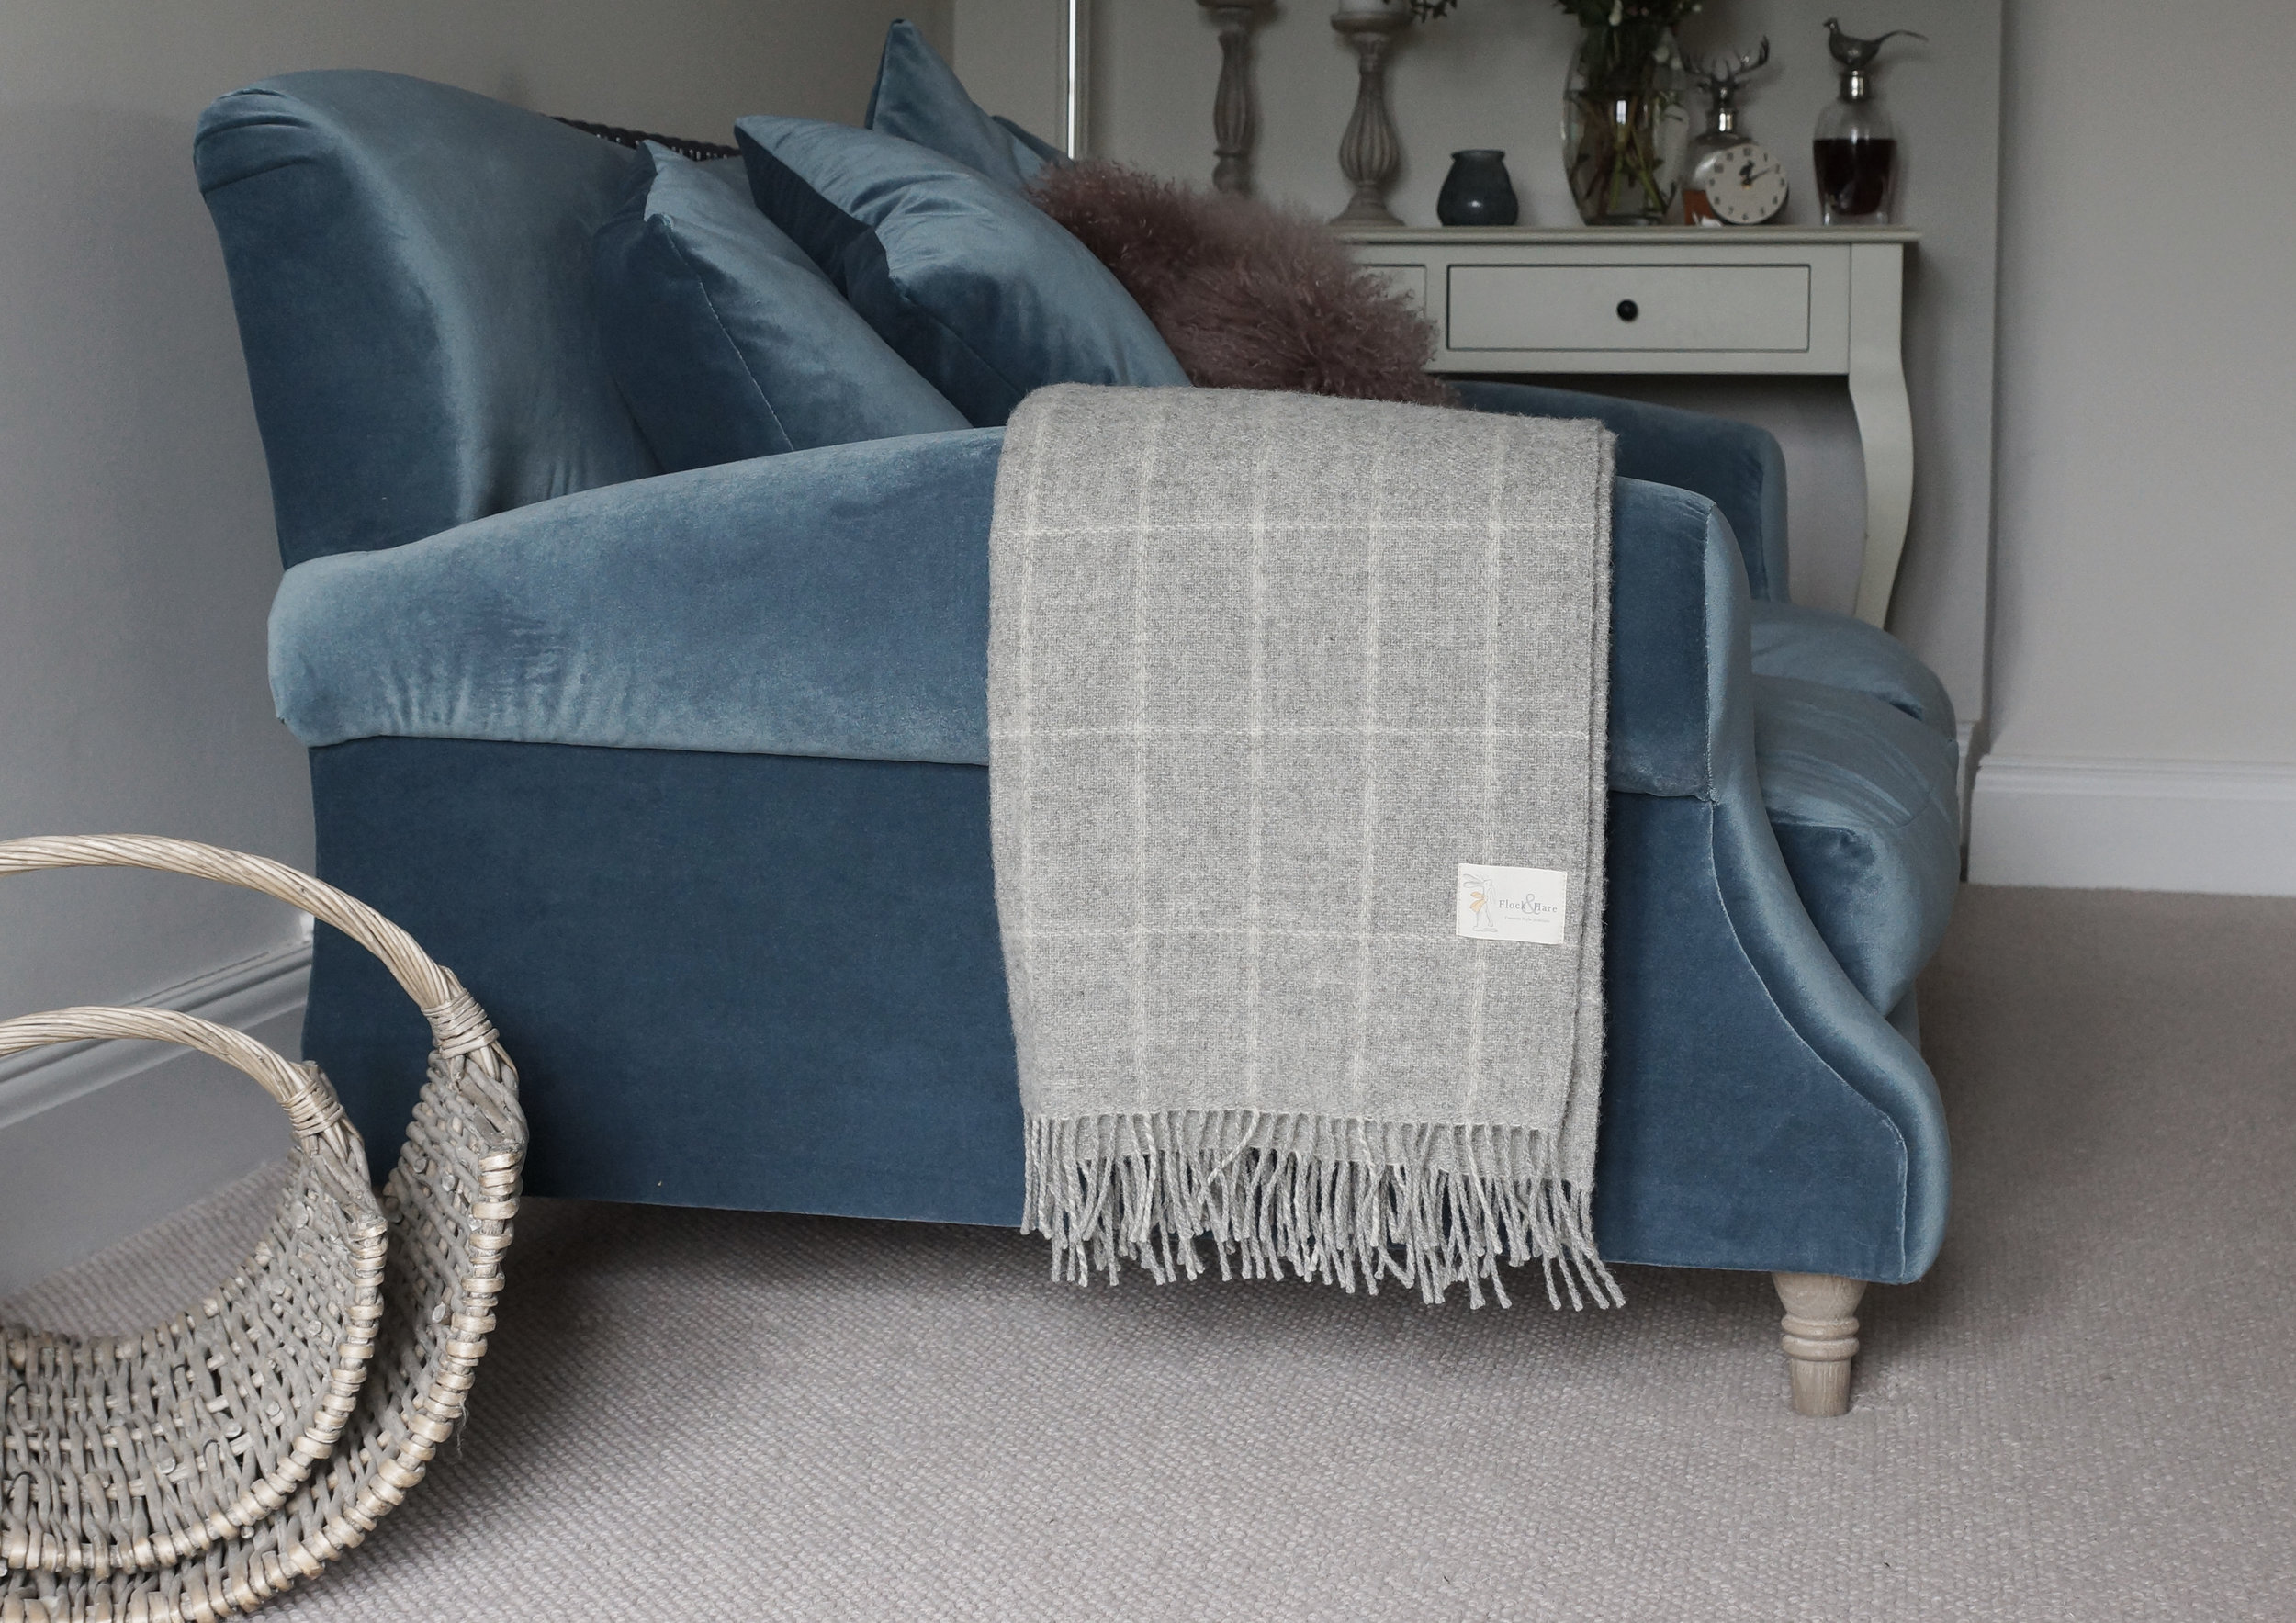 Wool throws and accessories